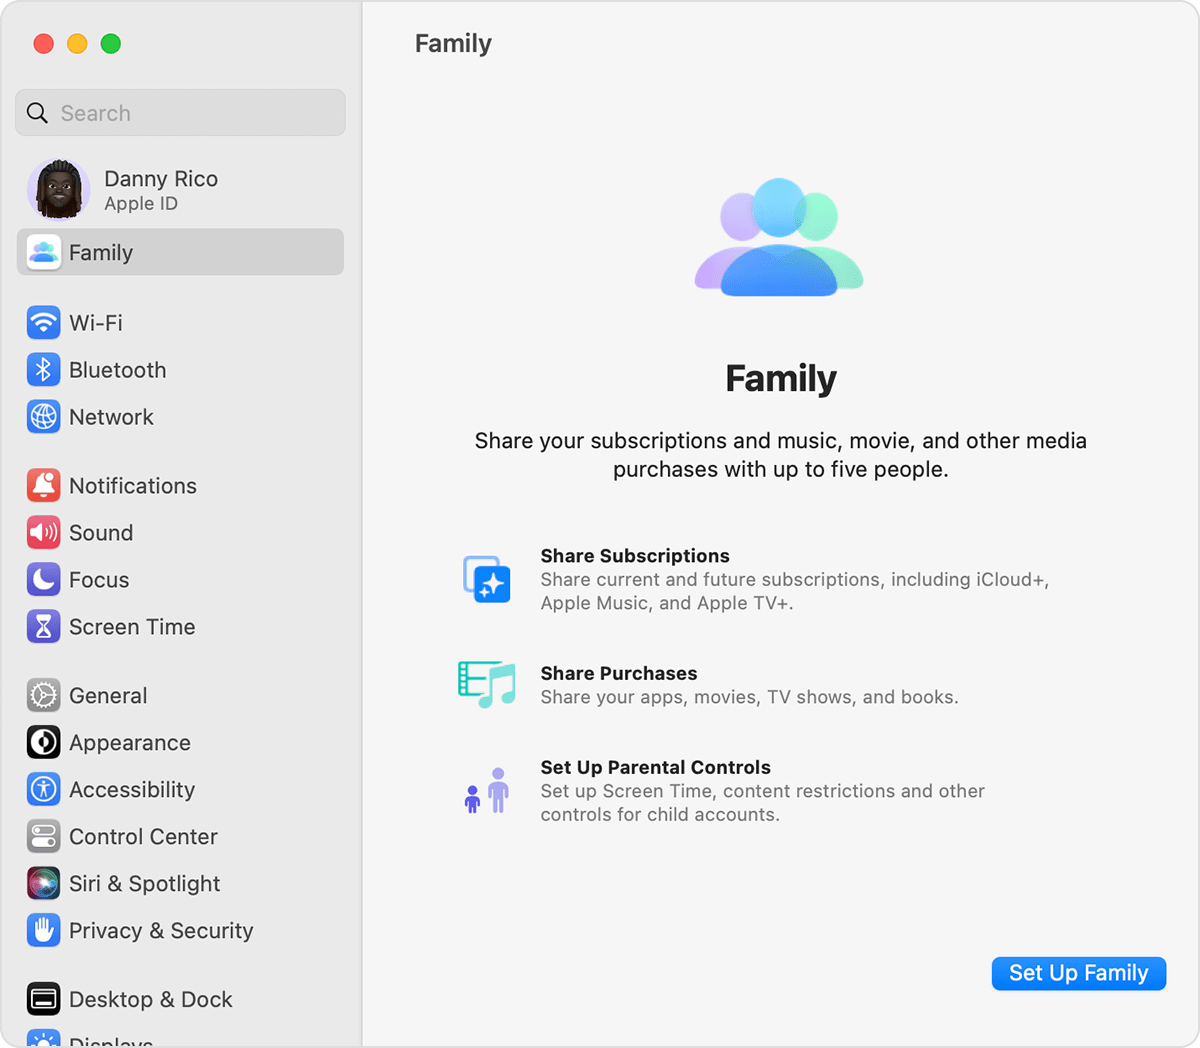 The Set Up Family button is on the lower right after you click Family.